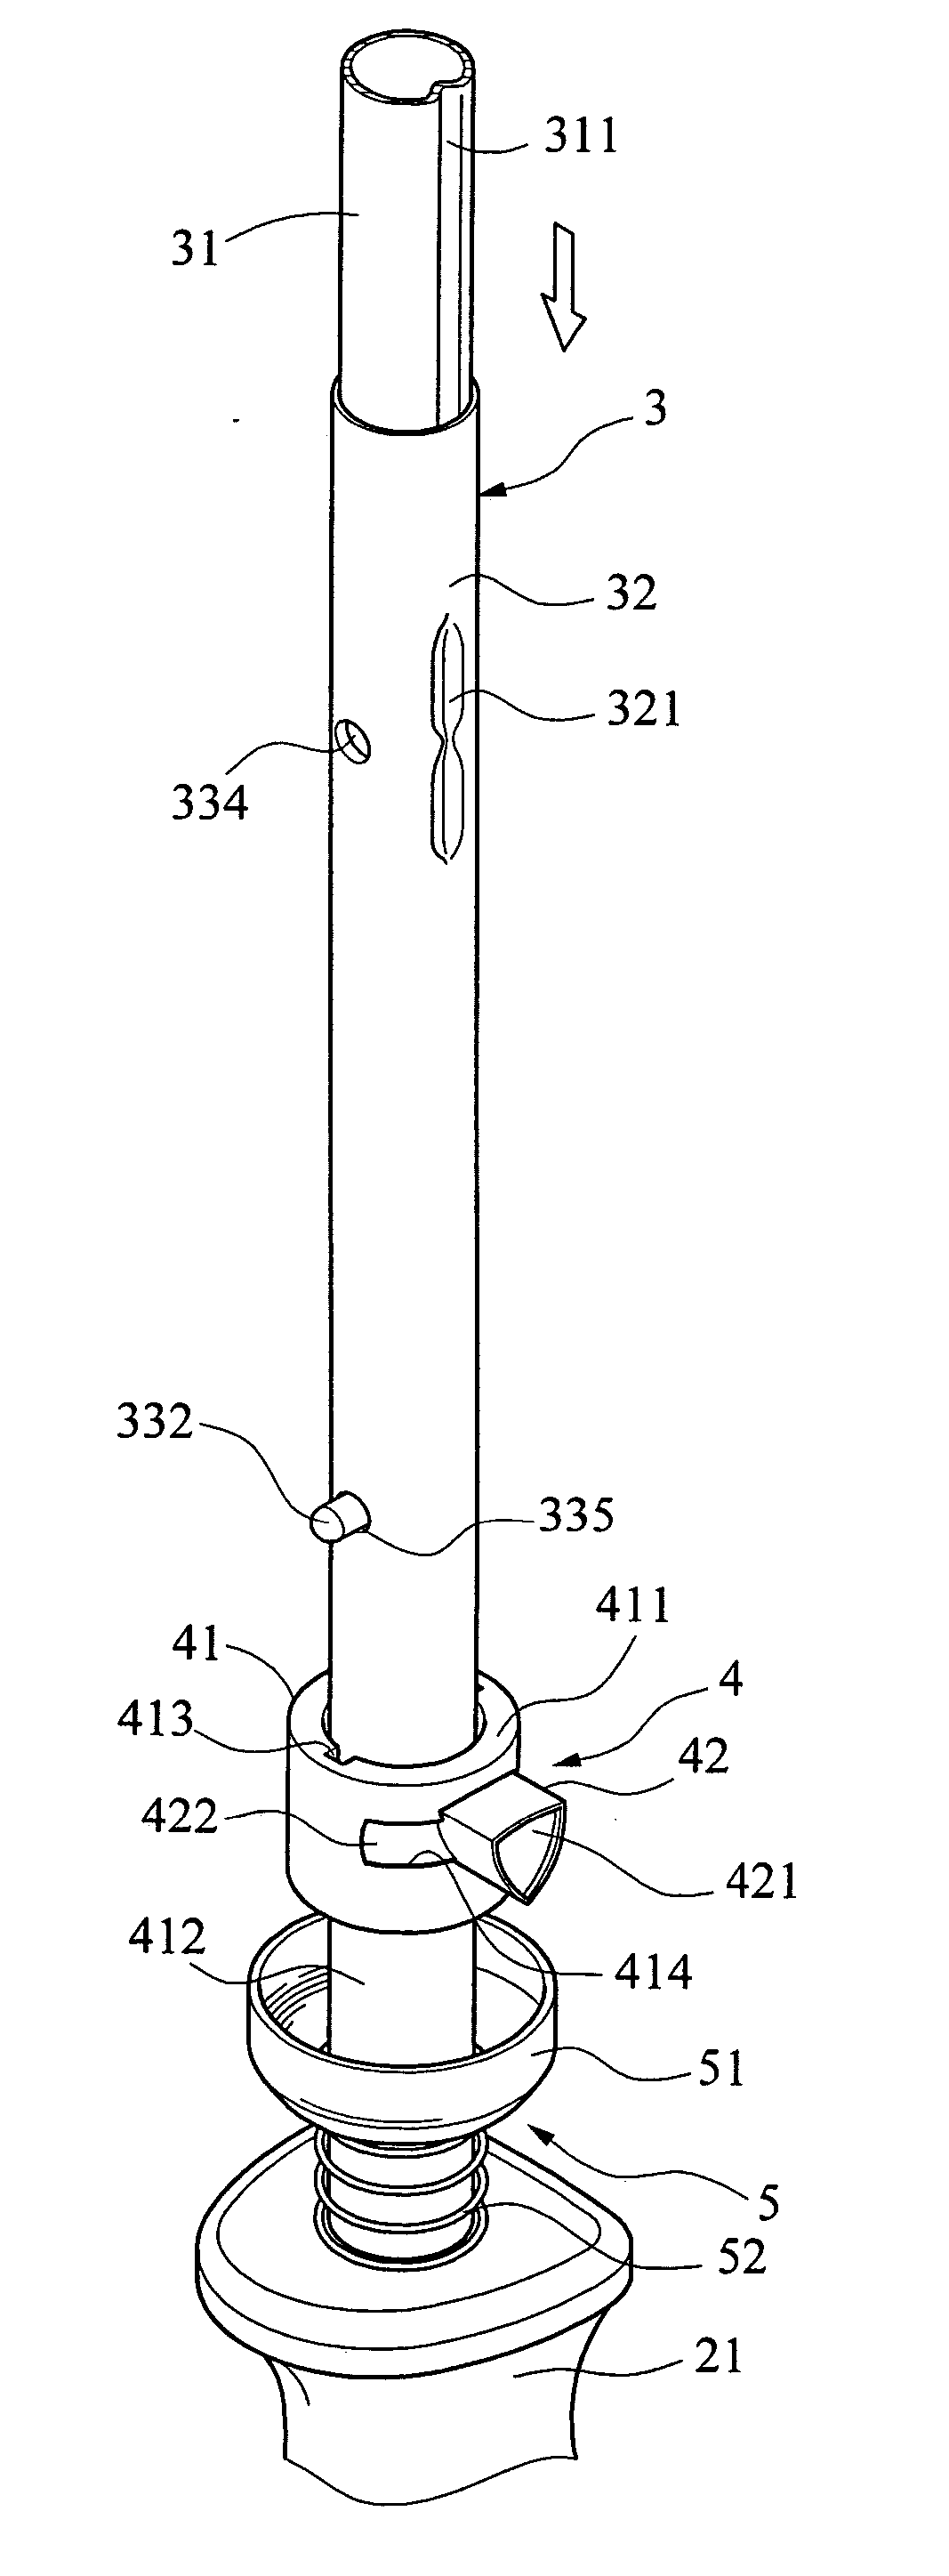 Lock mechanism of large umbrella for effecting a multi-sectional length adjustment of telescopic shank